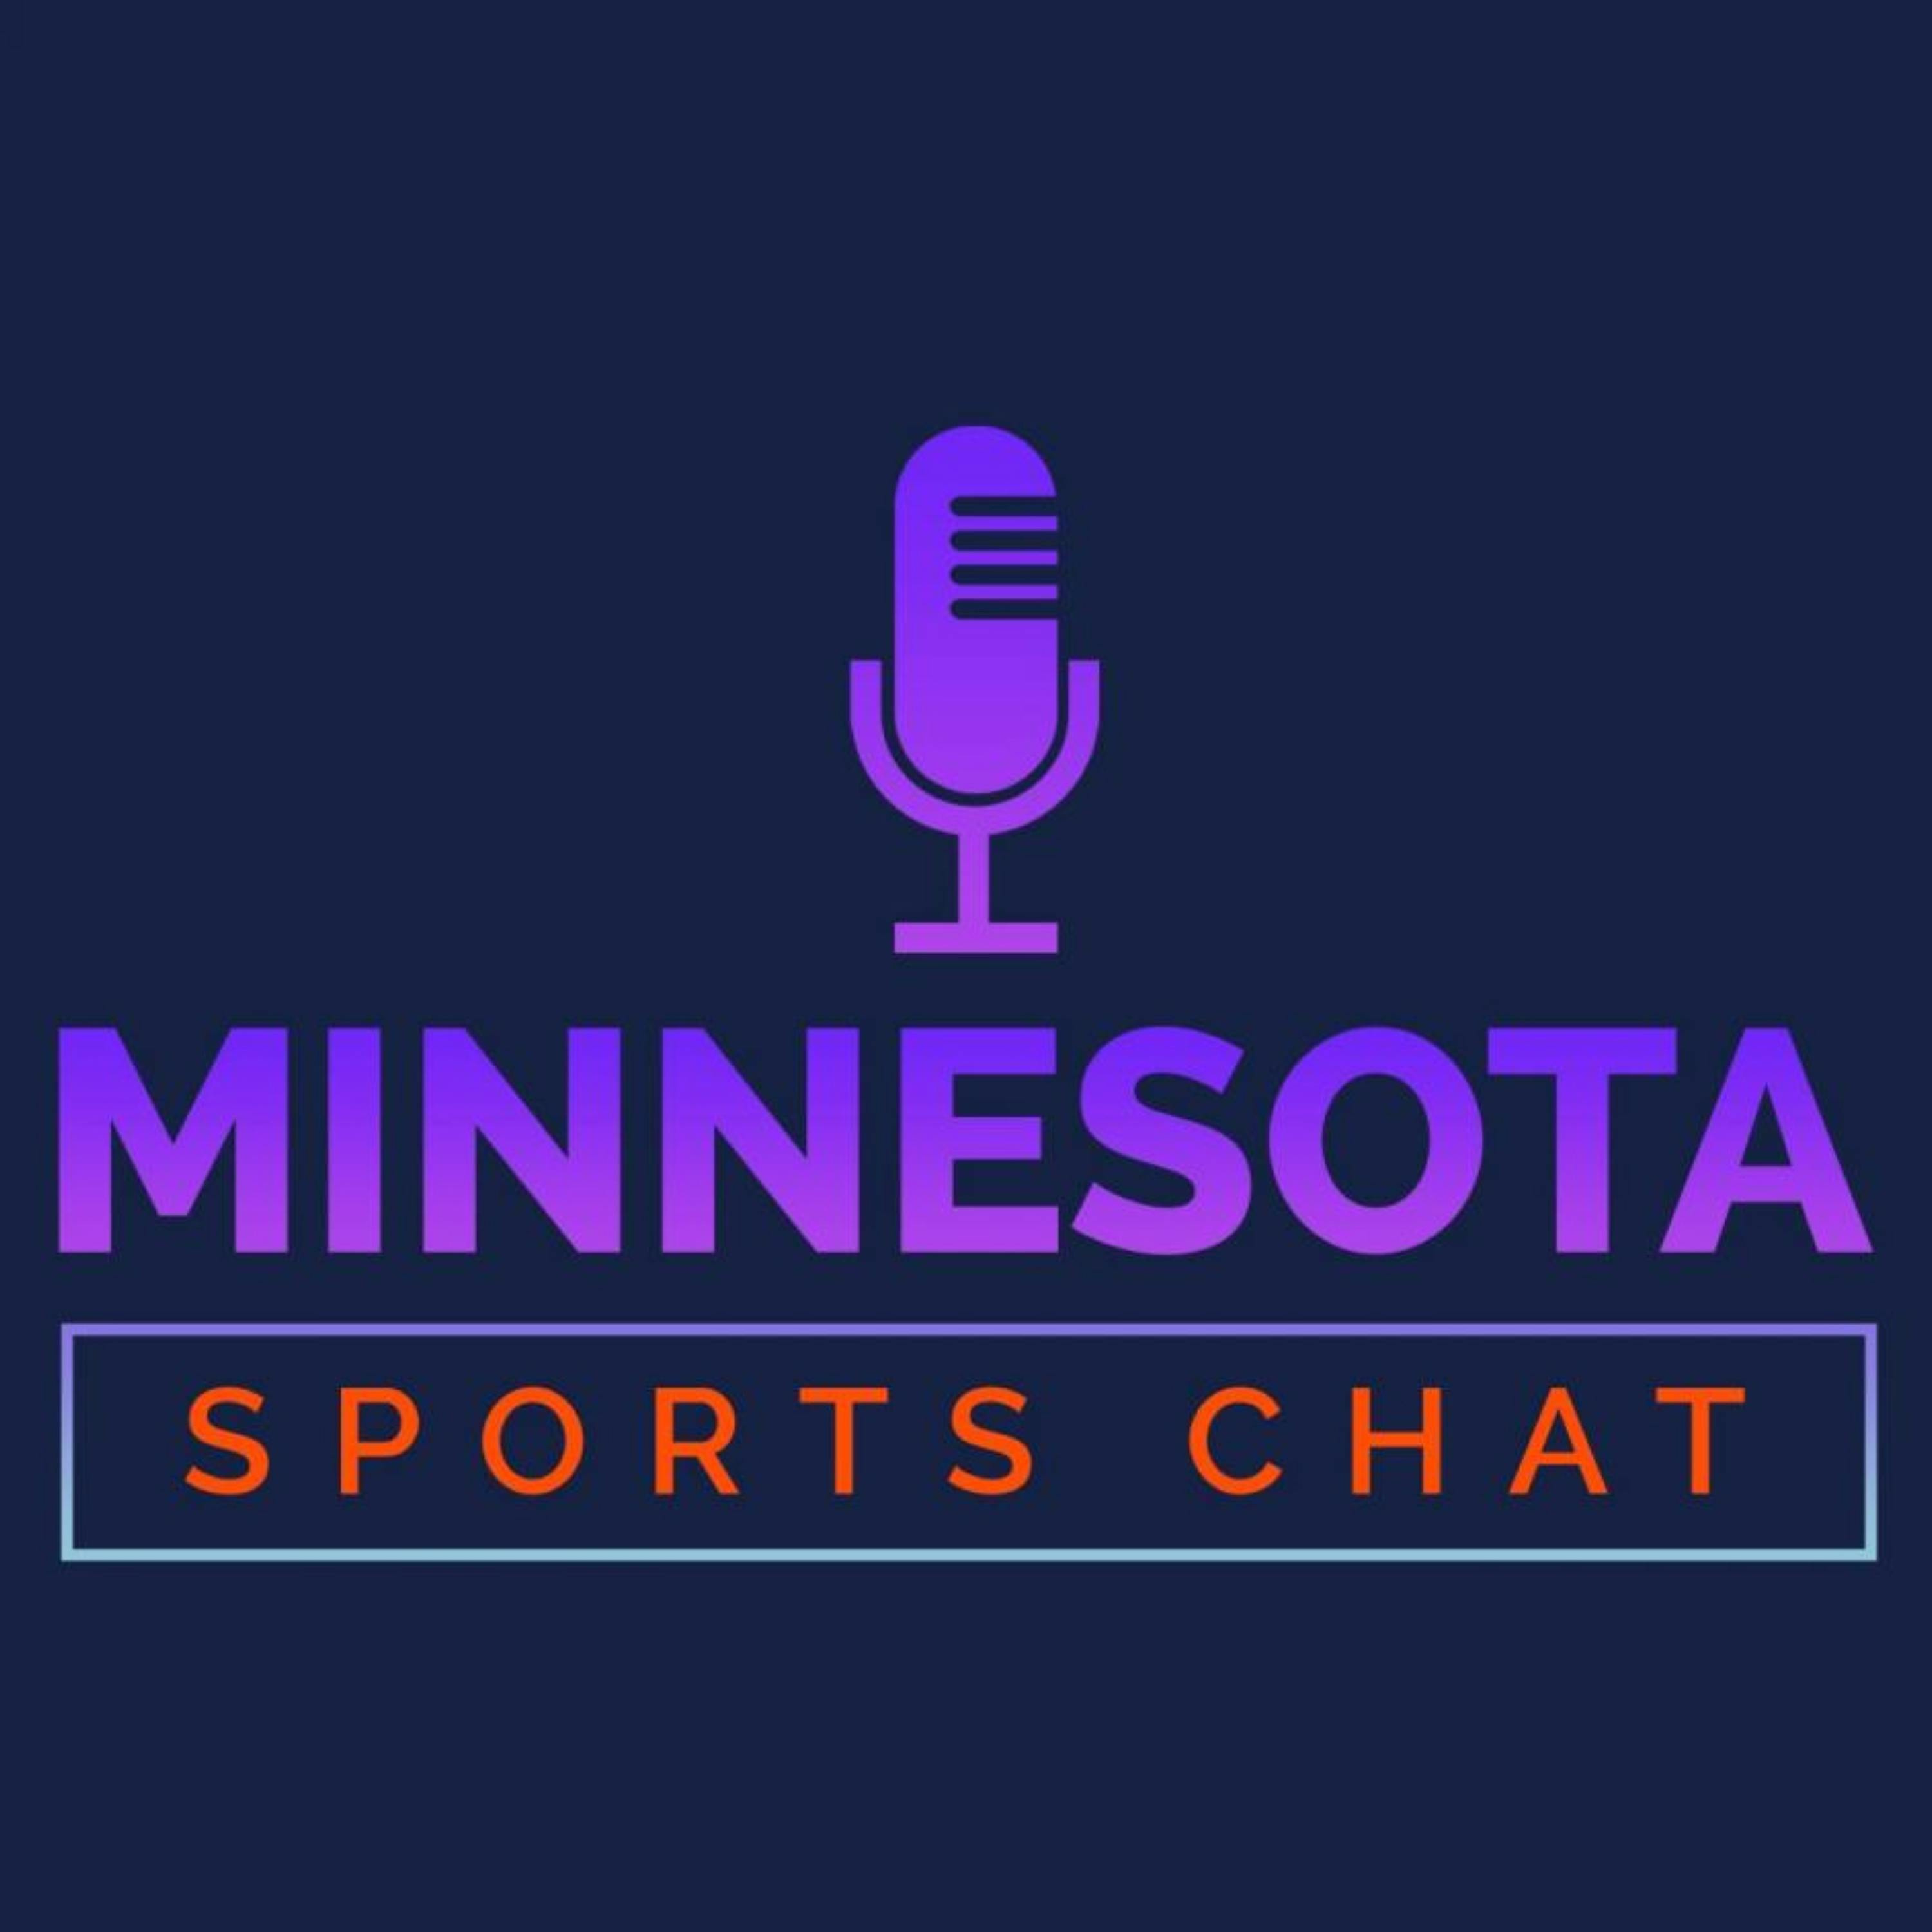 State of the Minnesota Vikings, Golden Gophers and Minnesota Twins